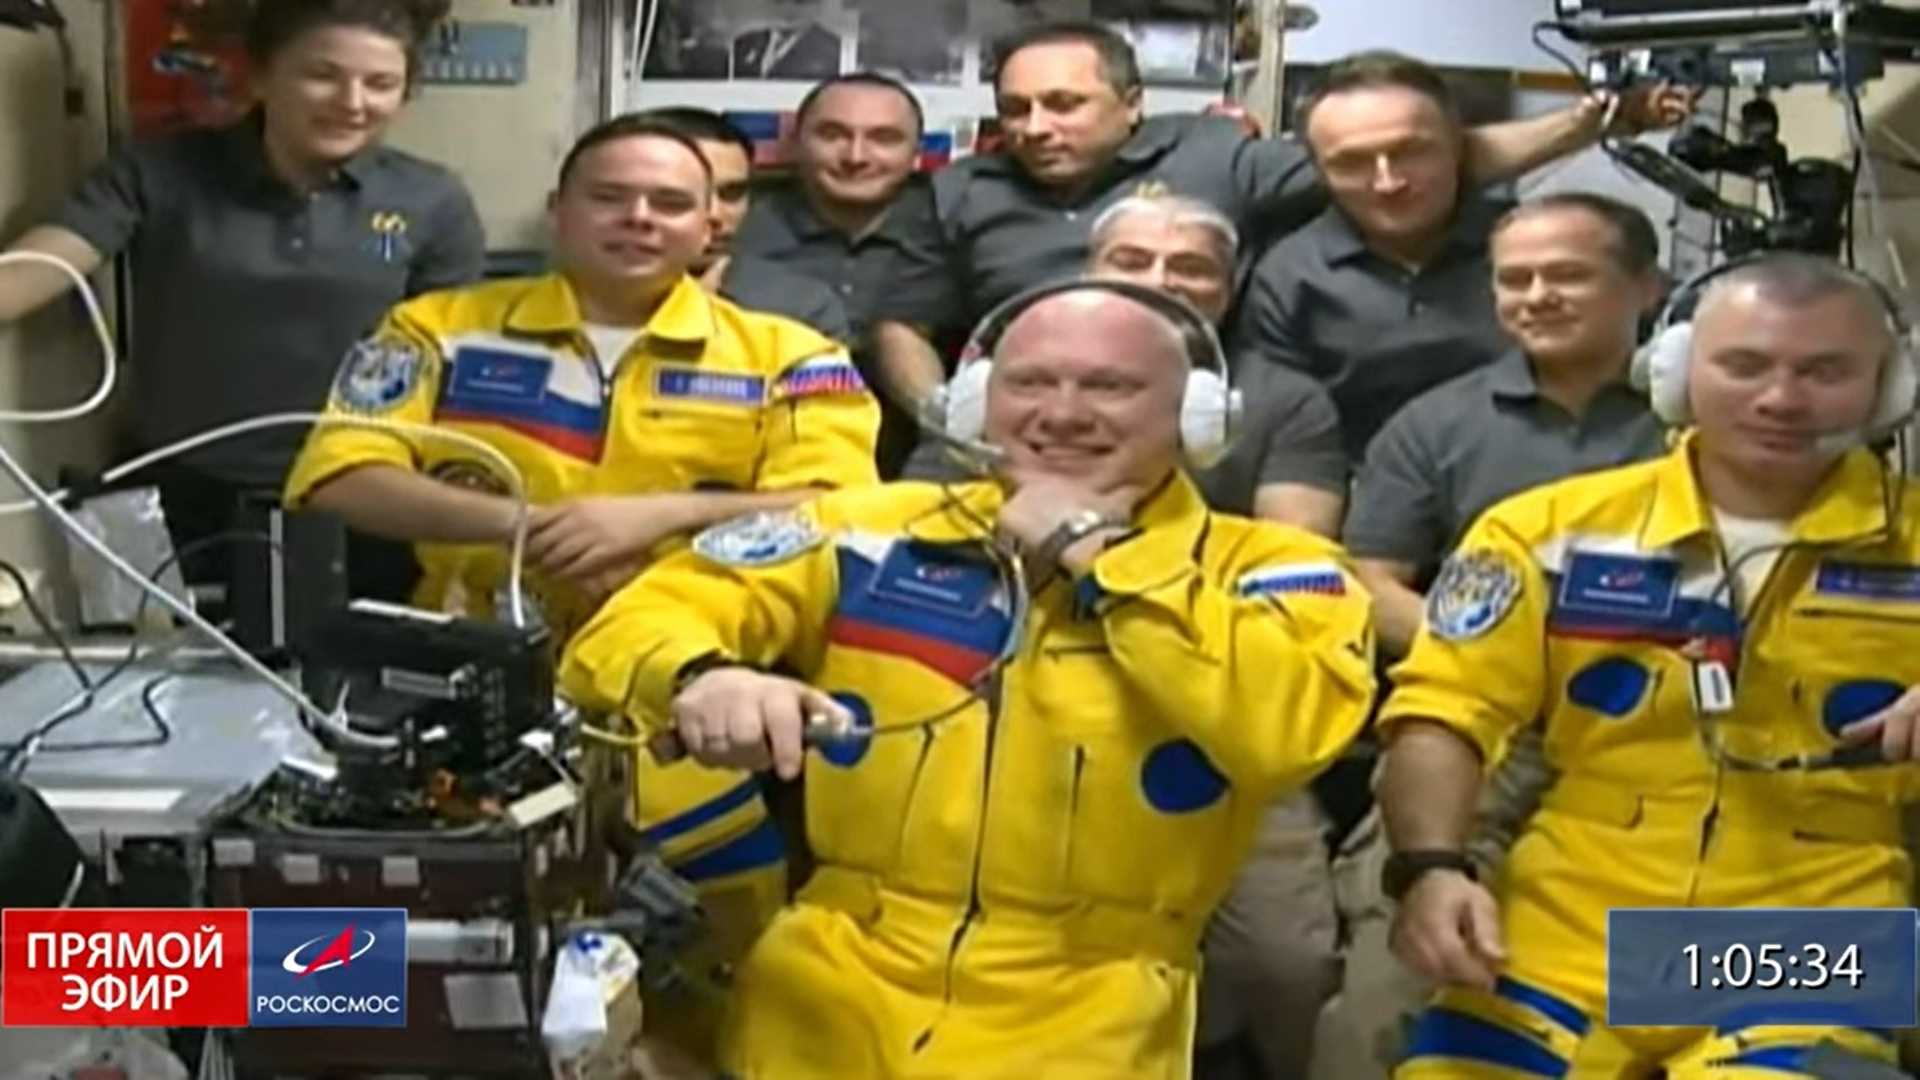 Cosmonauts Oleg Artemyev, Denis Matveev and Sergey Korsakov float aboard the International Space Station after arriving on a Soyuz spacecraft on March 18, 2022. The trio donned bright yellow and blue flight suits as they joined seven other crewmates on the station.